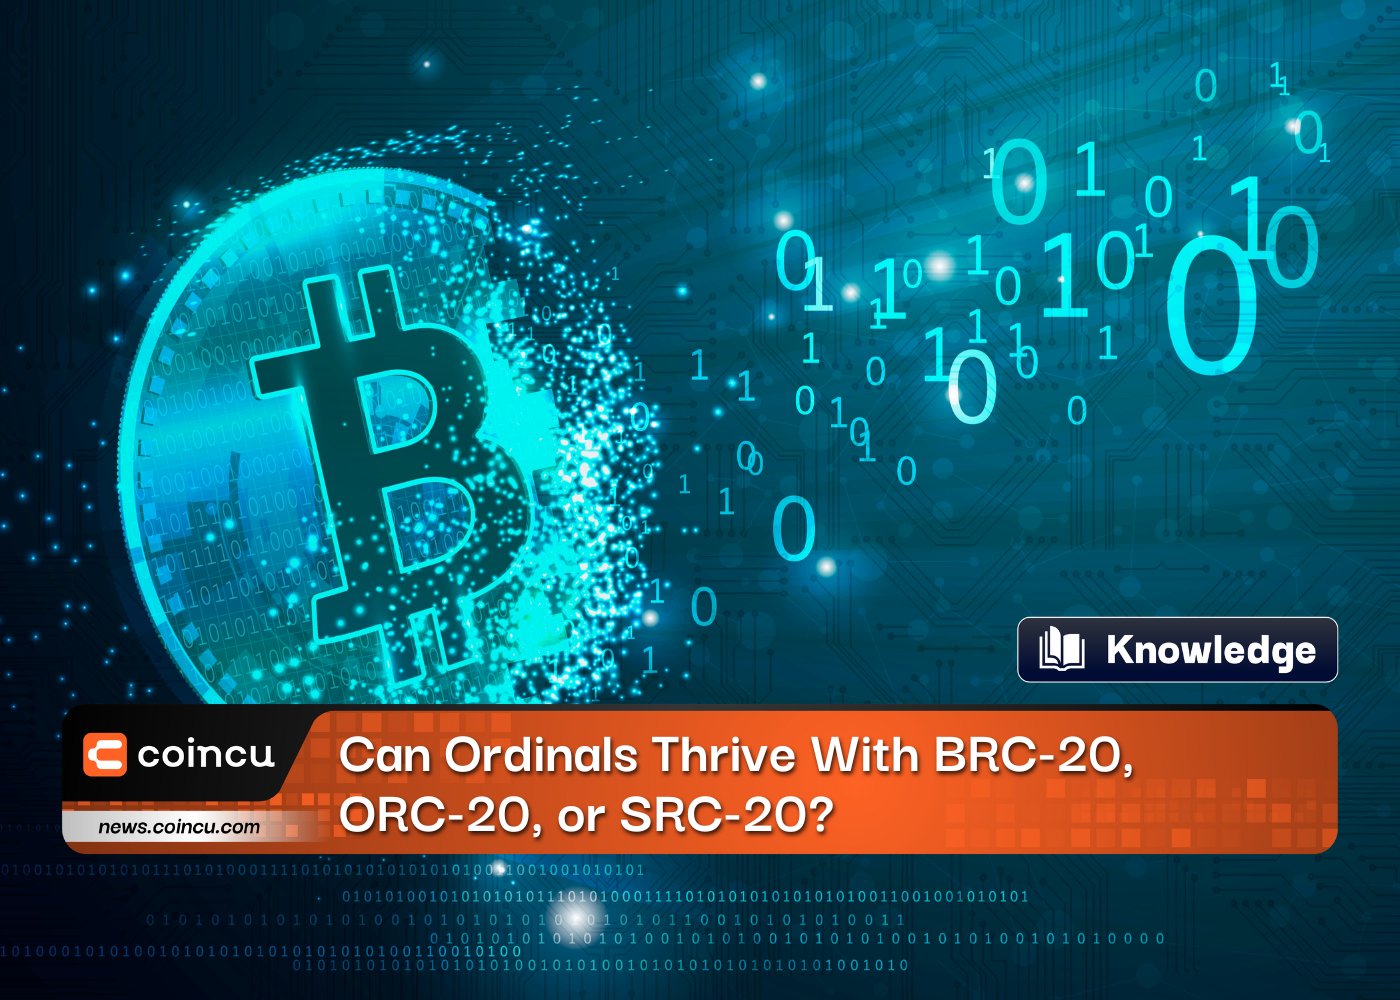 Can Ordinals Thrive With BRC-20, ORC-20, or SRC-20?